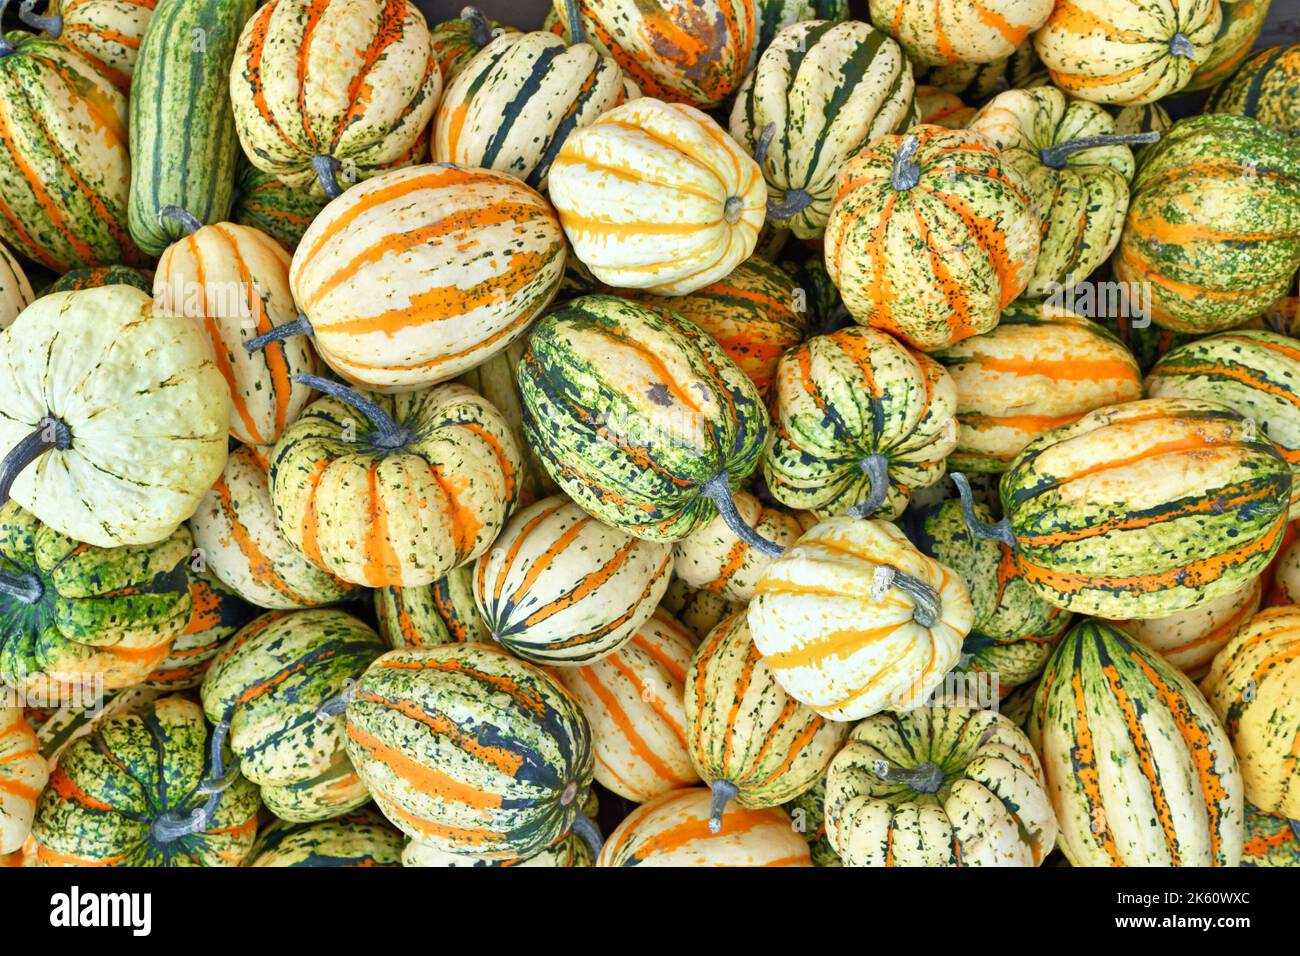 Top view many colorful striped Acorn, Carnival and Delicata squashes Stock Photo